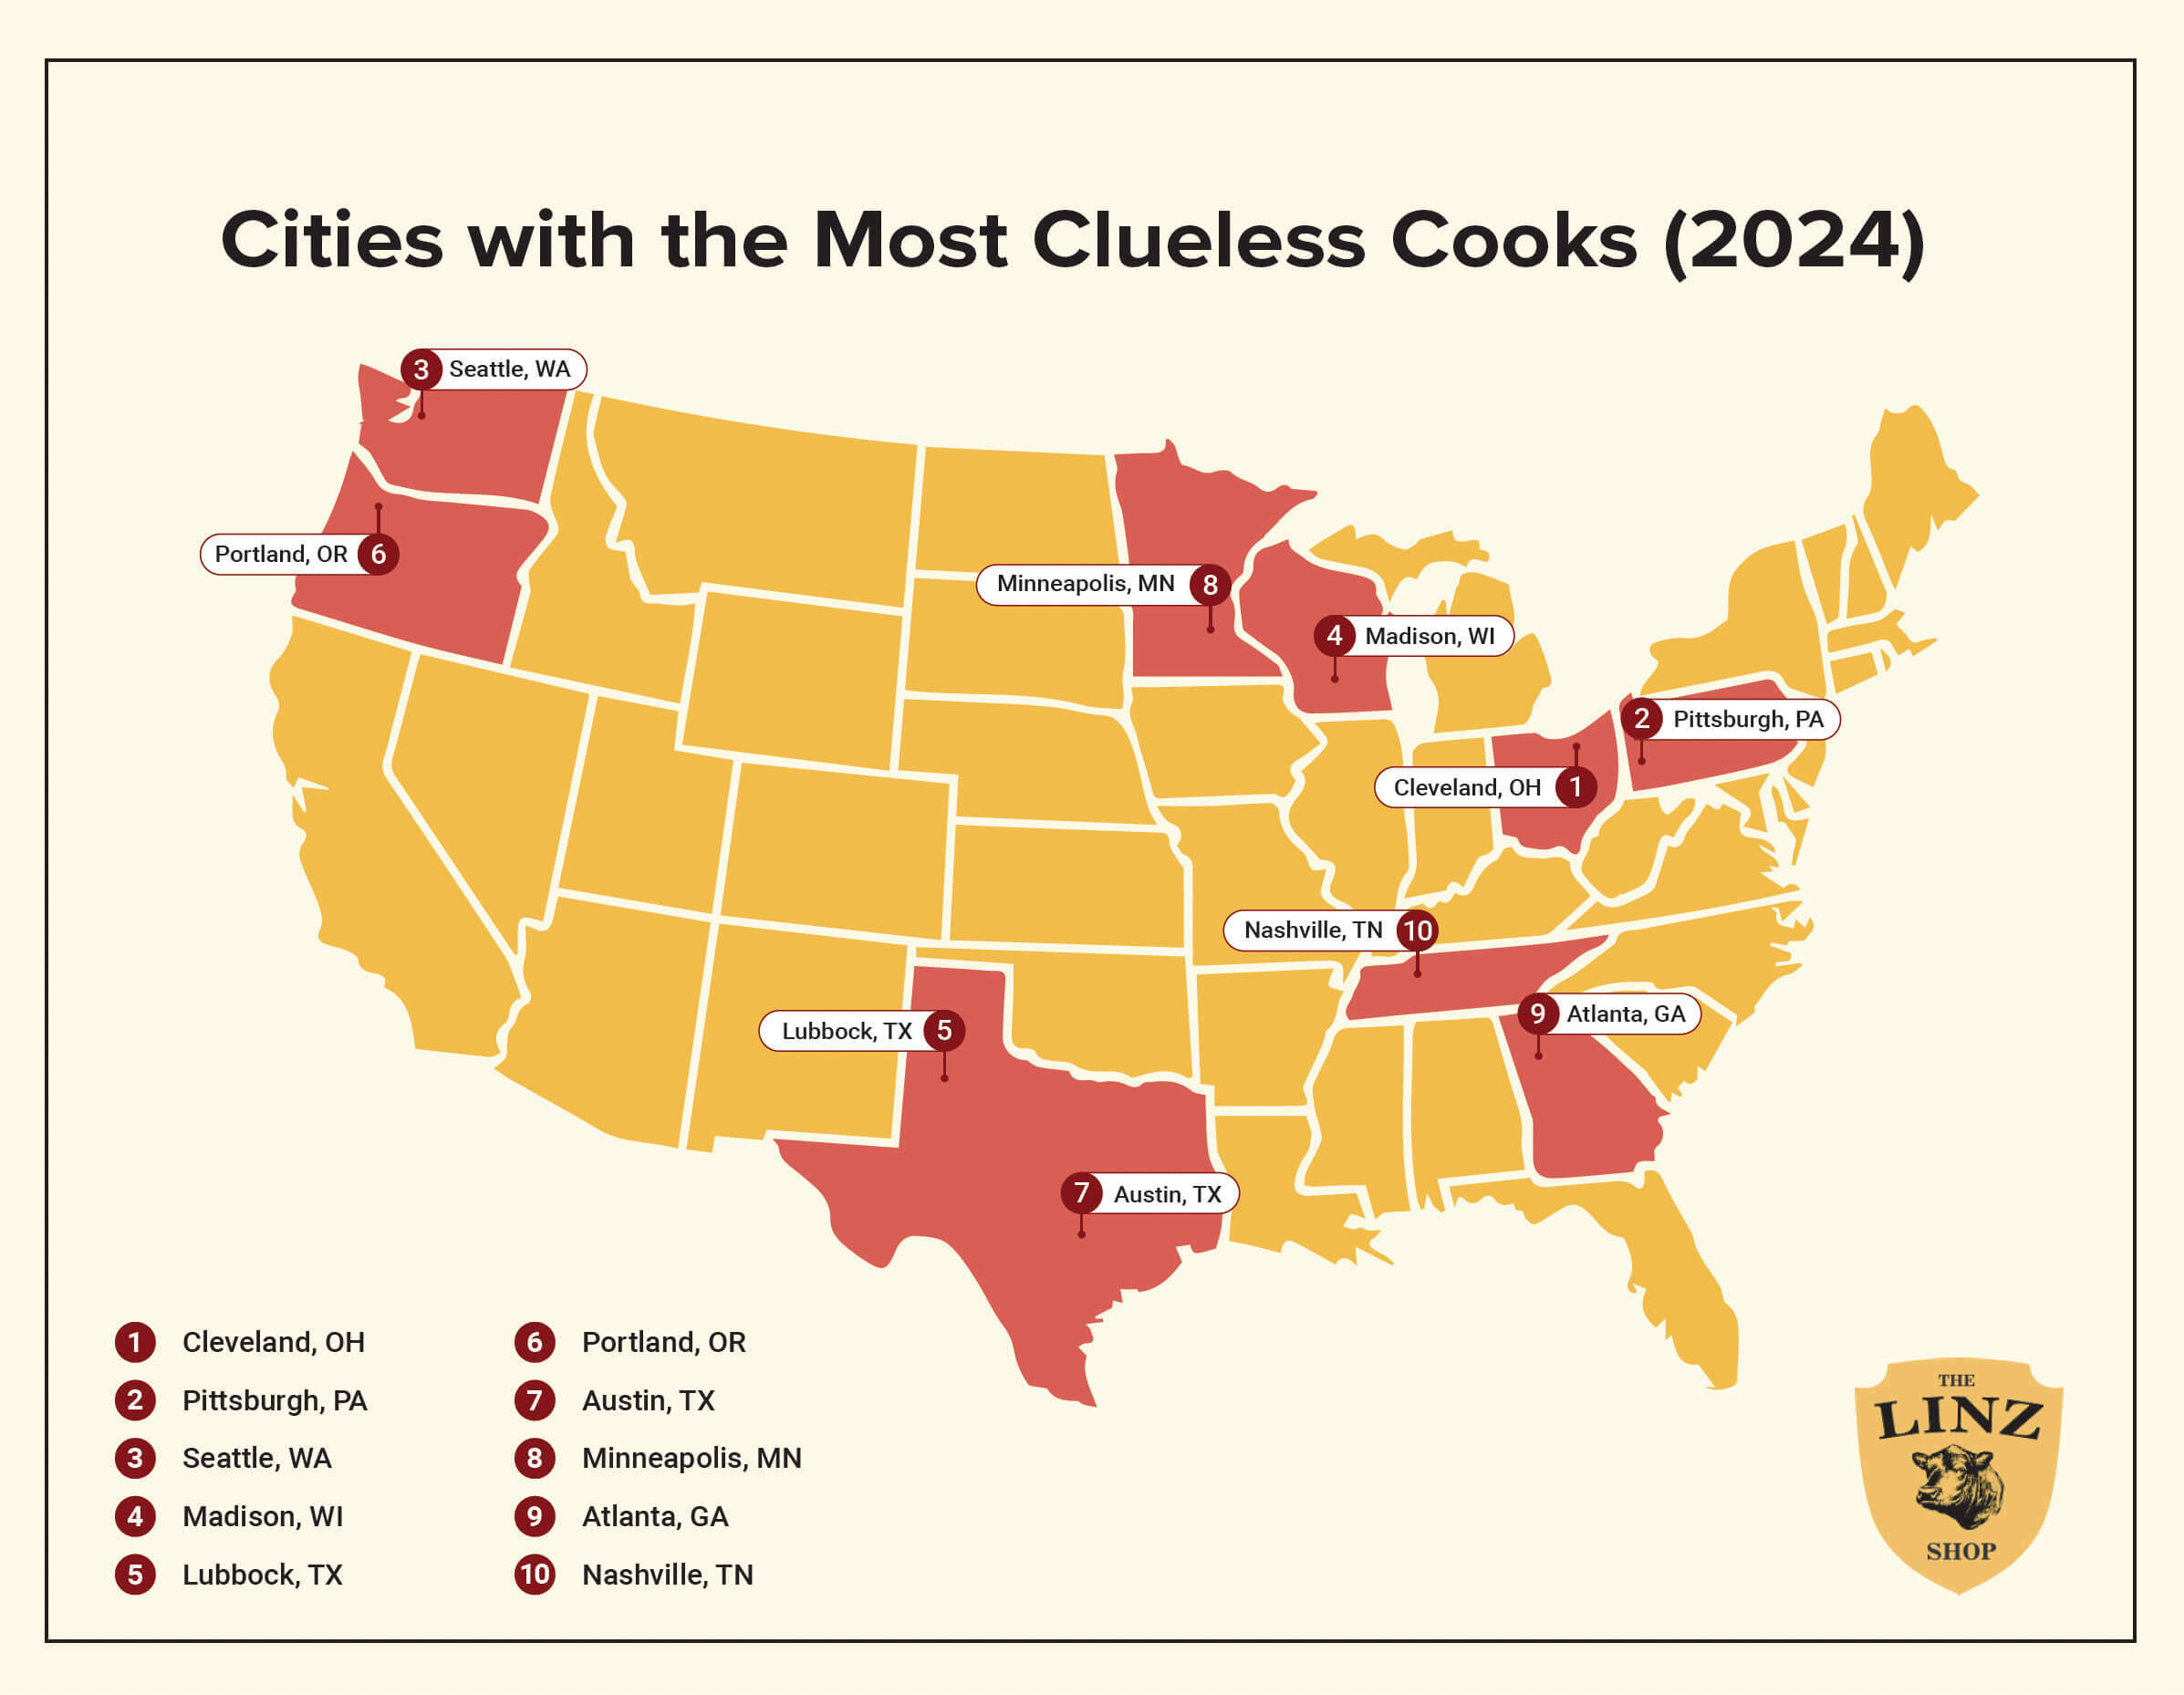 City with most clueless cooks (2024)